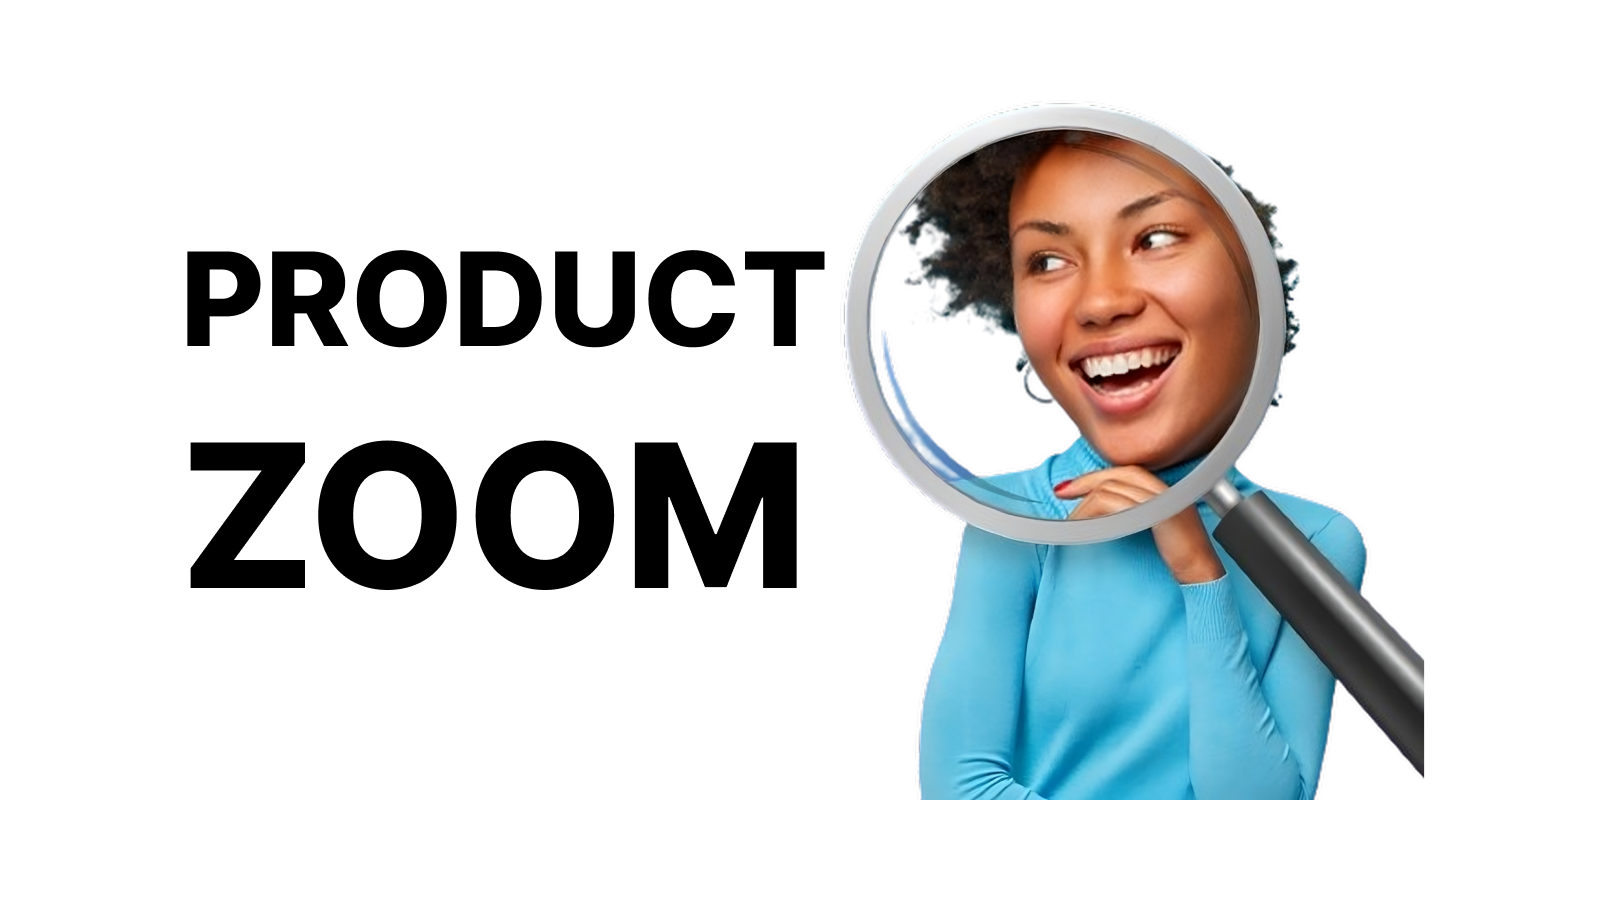 Product zoom